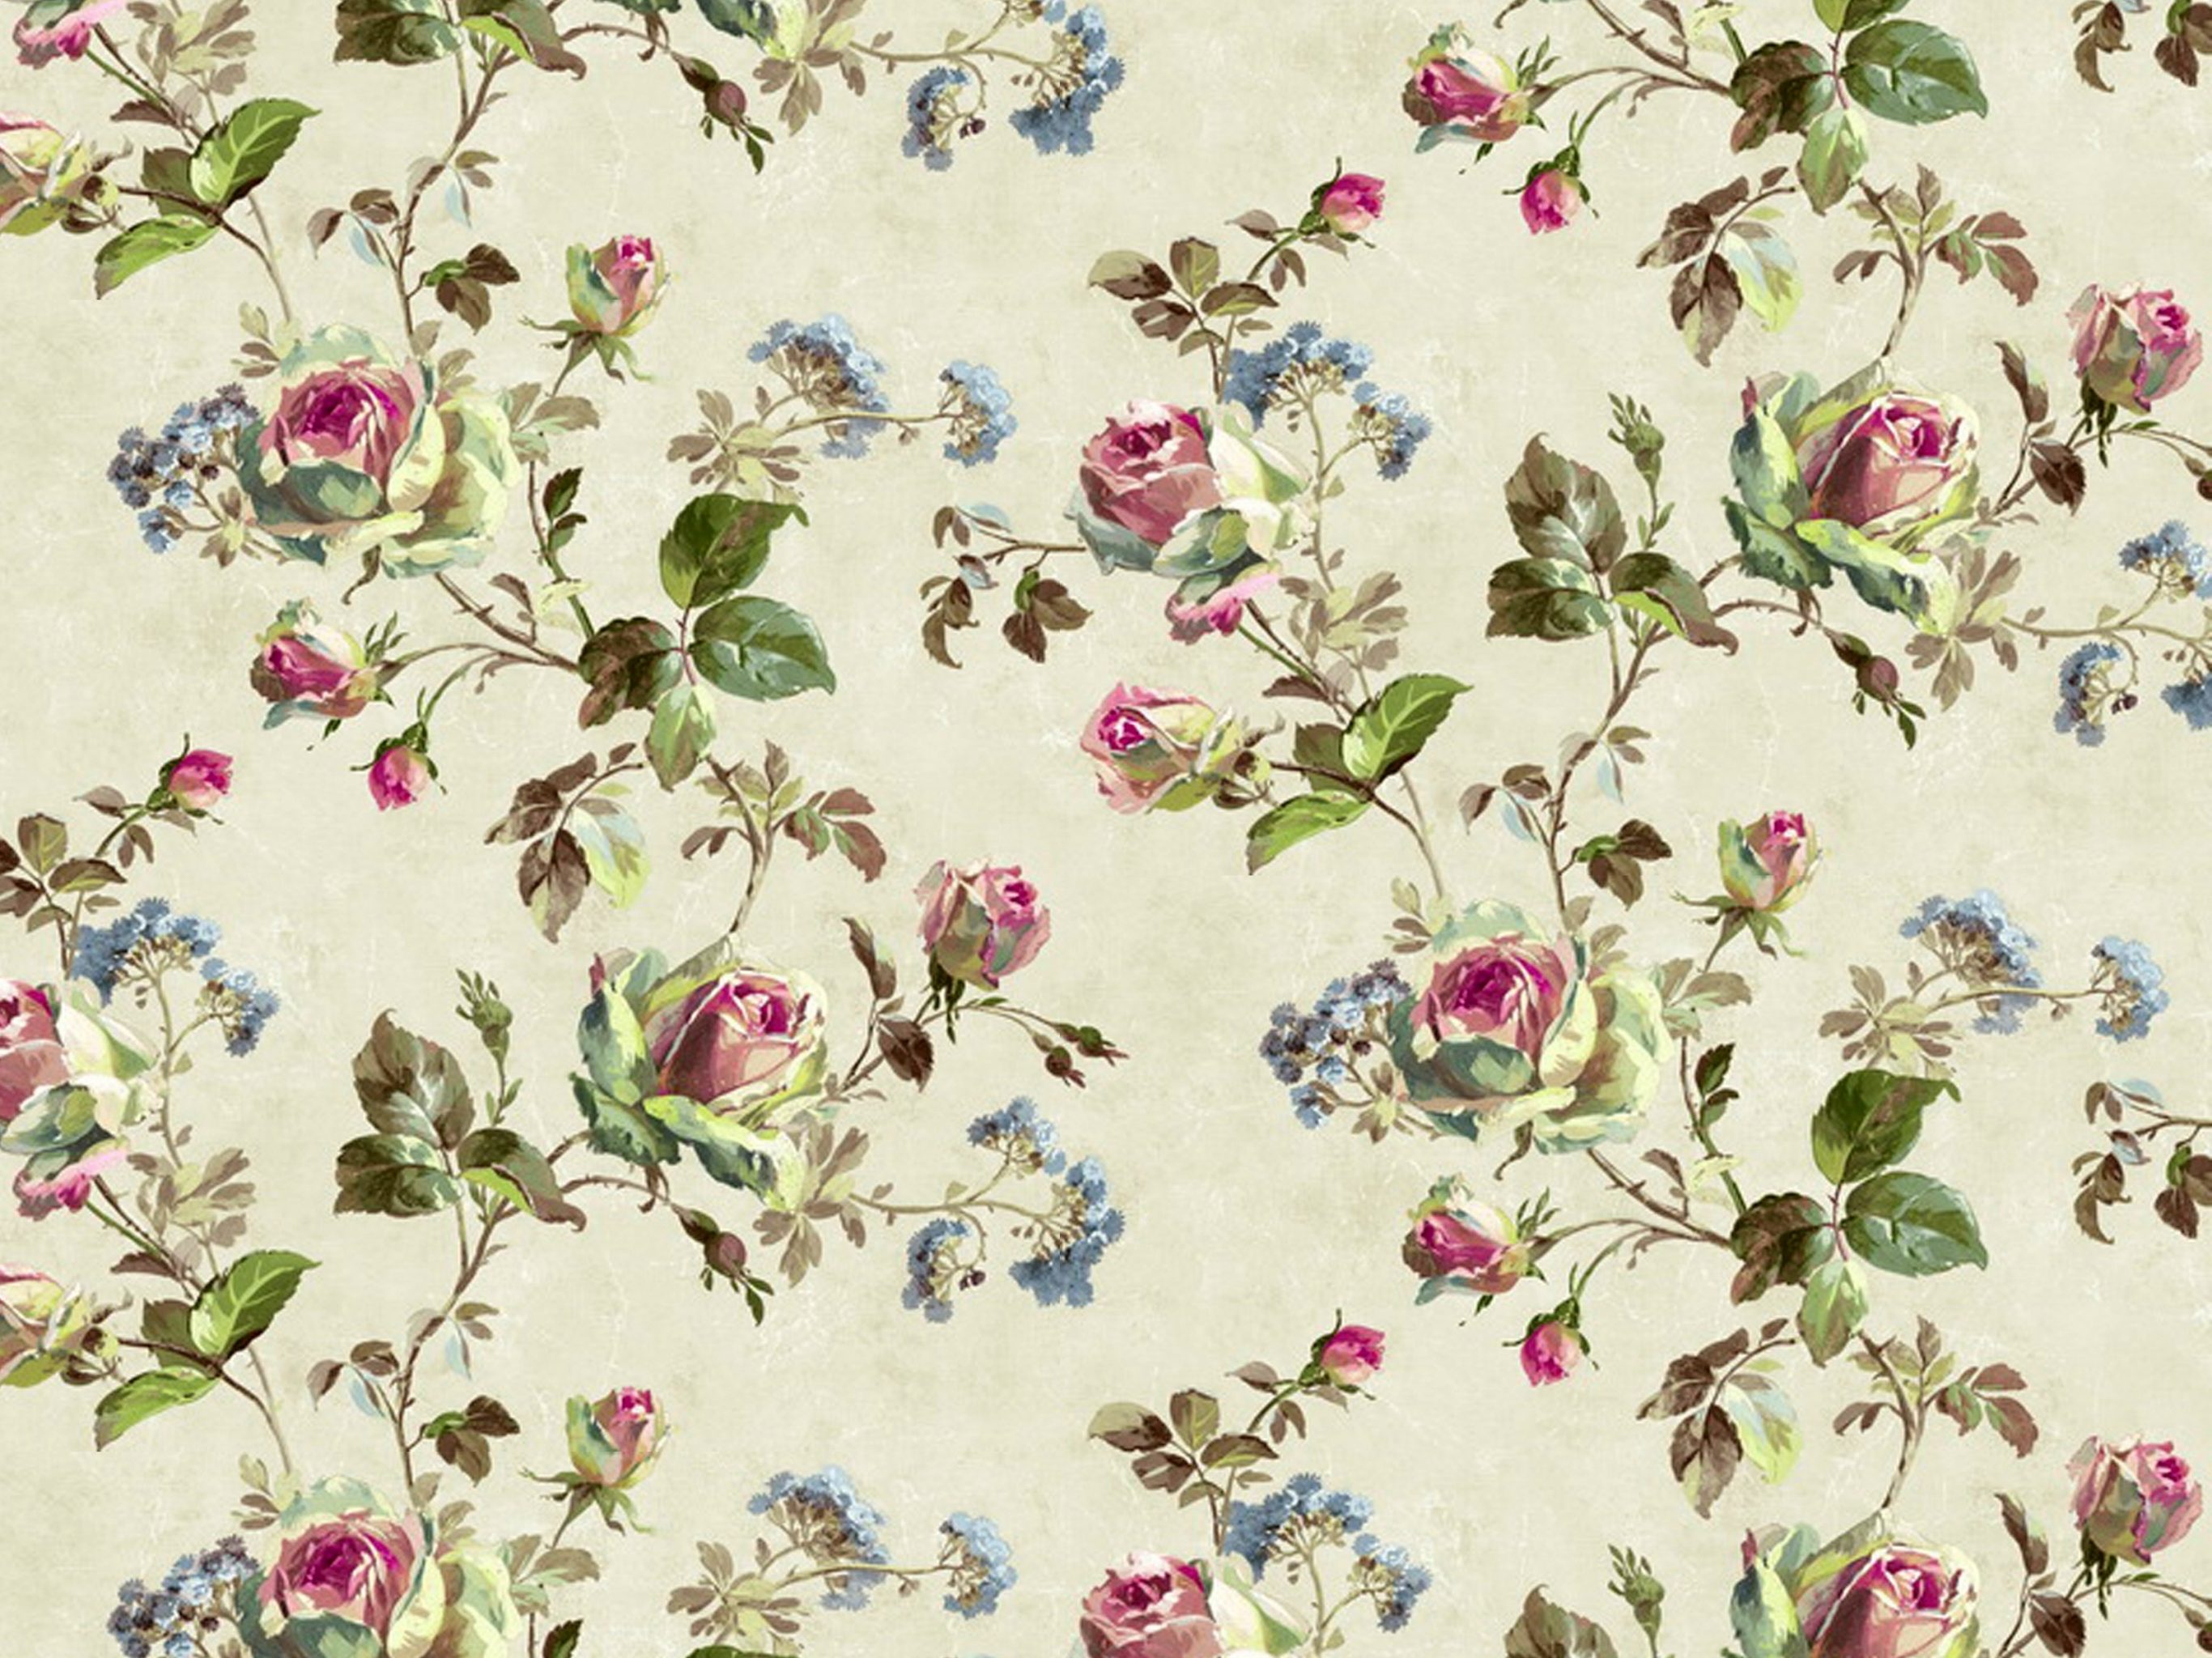 2732x2048 iPad air iPad Pro wallpapers Aesthetic Paper Colorful Flowers Paint iPad Wallpaper 2732x2048 pixels resolution